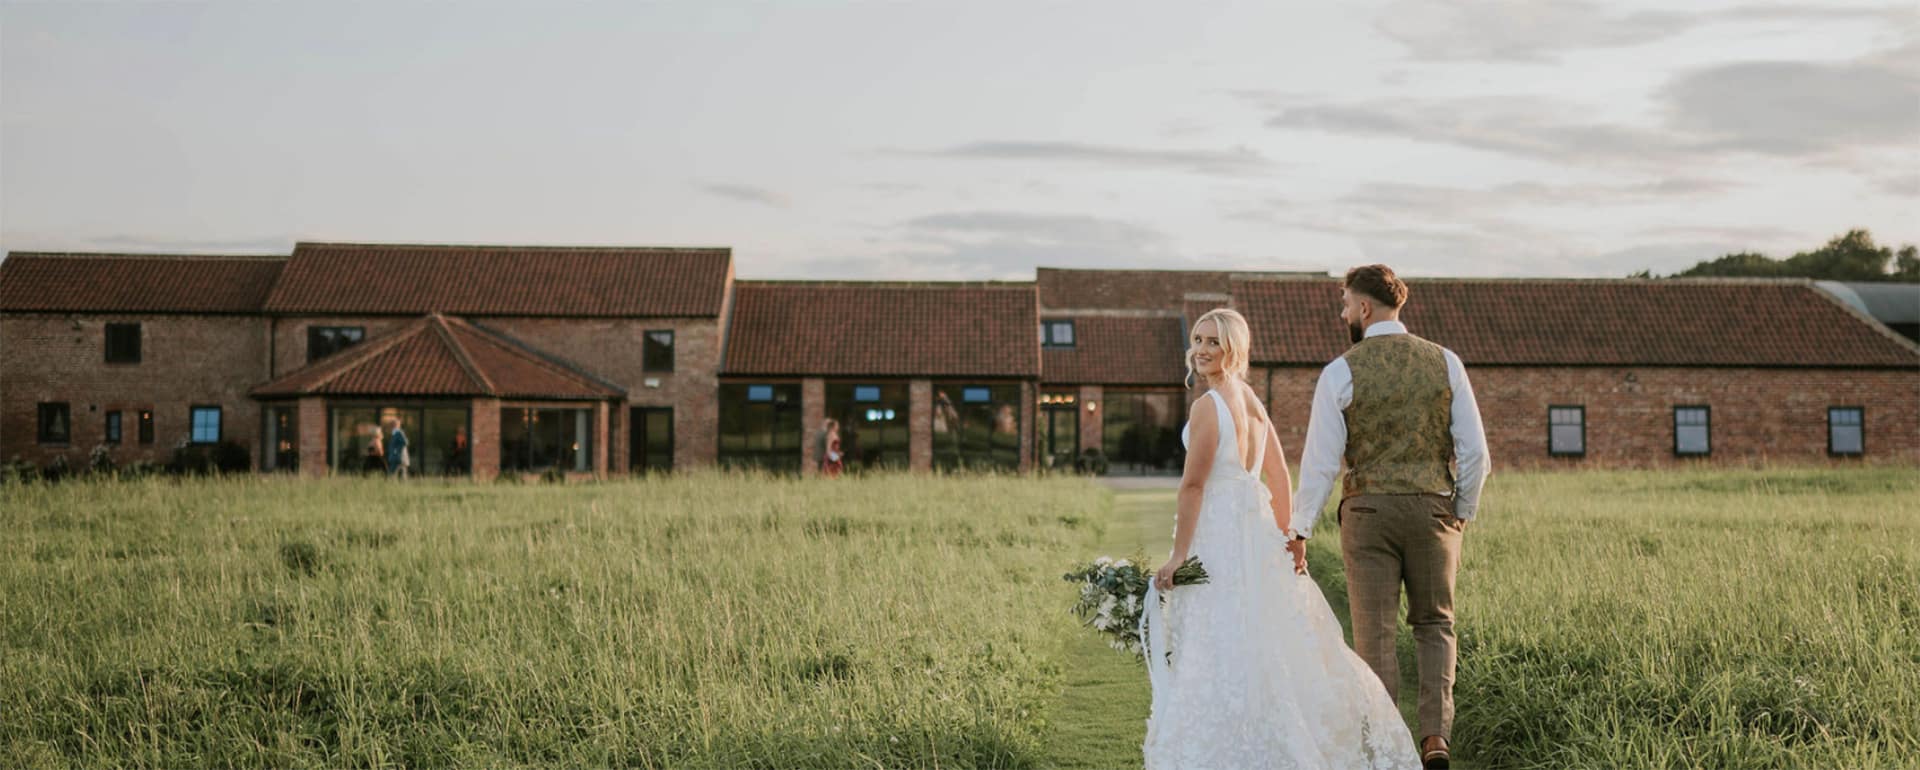 Laura & Connor’s Relaxed Thirsk Lodge Barns Wedding